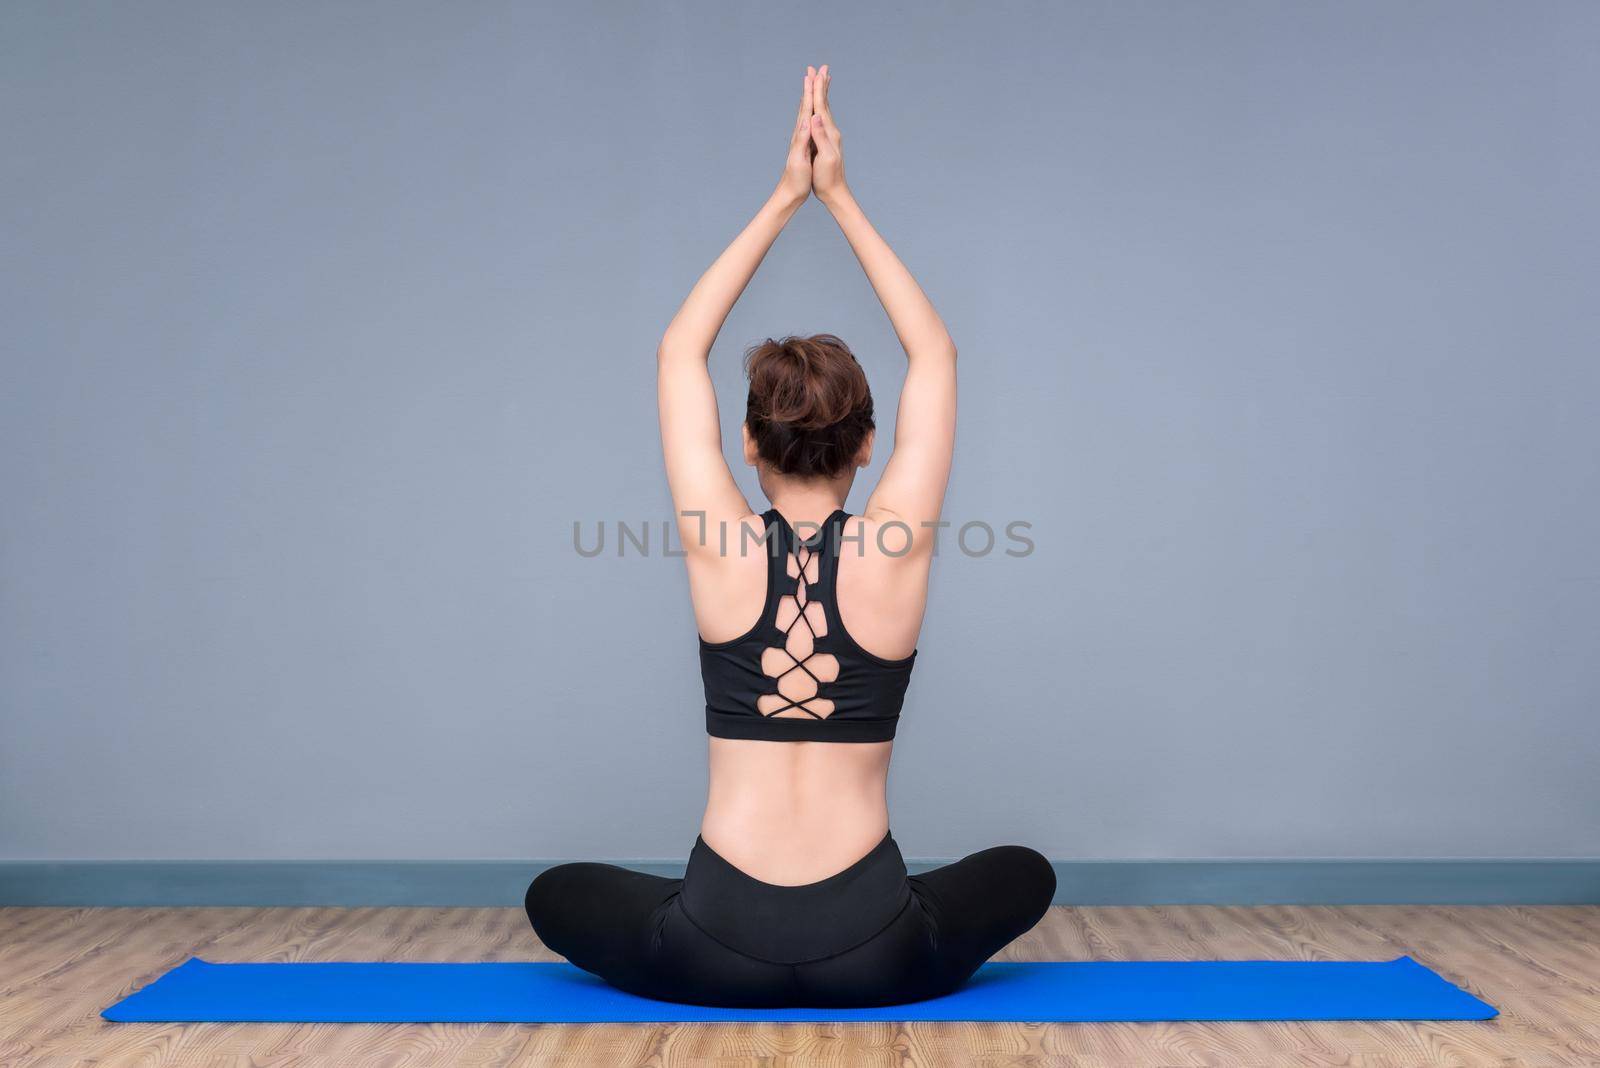 Healthy woman exercising yoga at sport gym, girl doing sport indoor.Photo design for fitness sporty woman and healthcare concept. by Nuamfolio